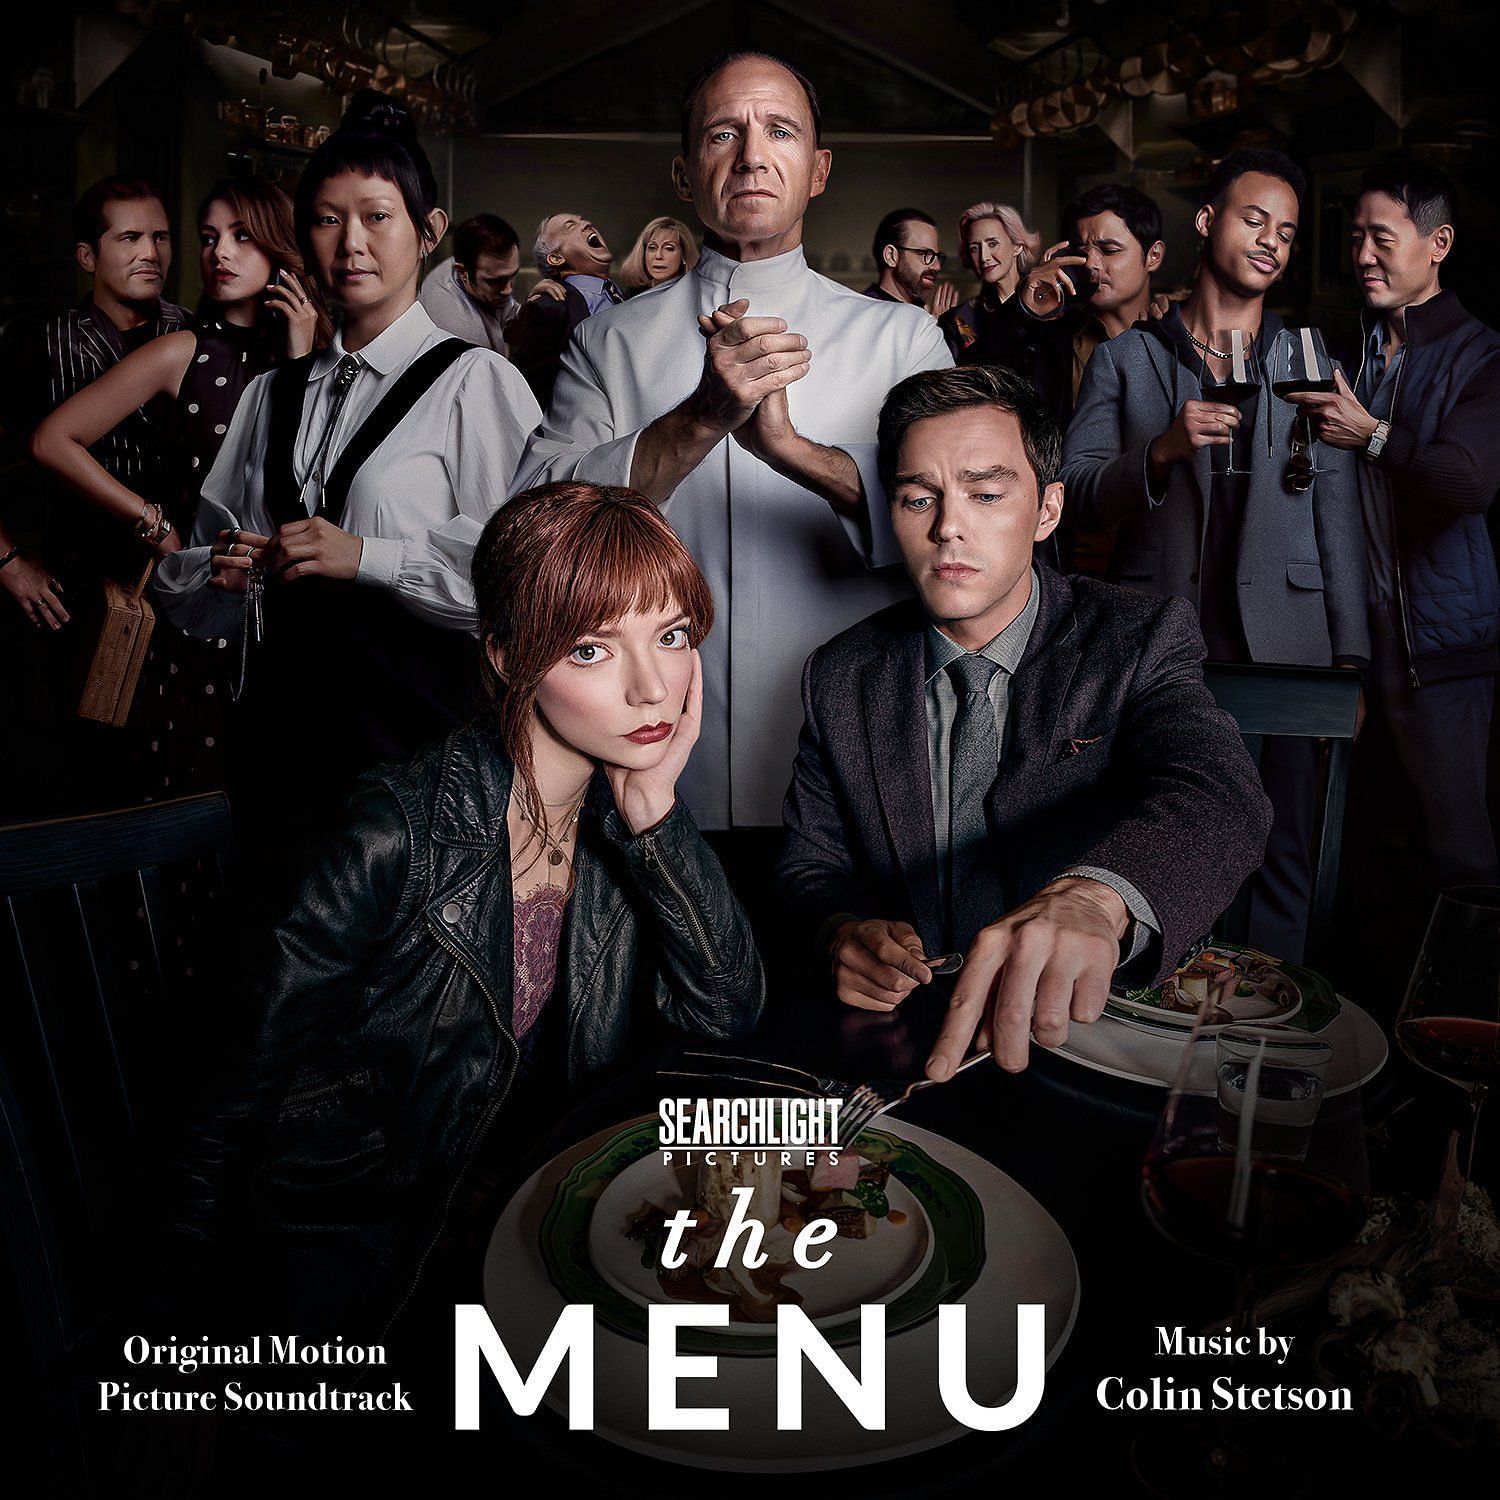 The Menu (Image via Searchlight Pictures)